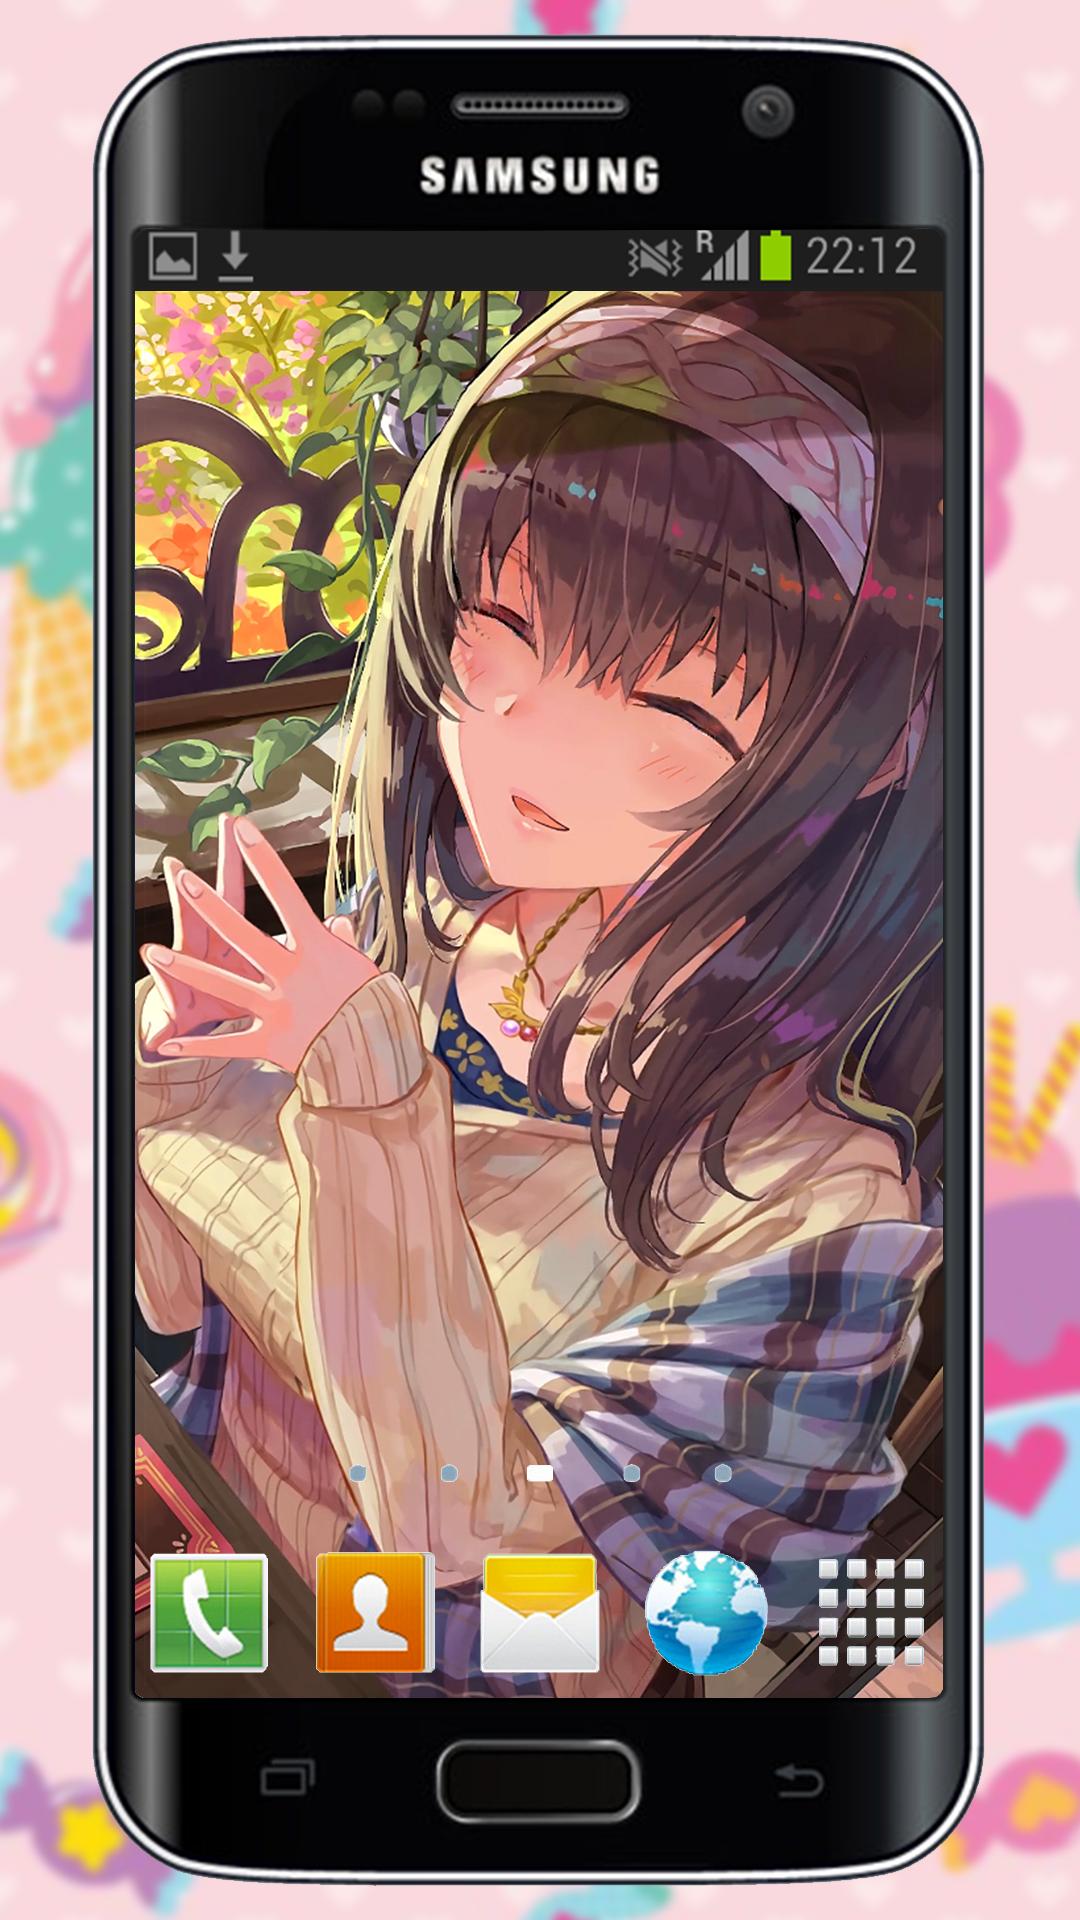 Art Anime Live Wallpaper Of Fumika Sagisawa 鷺沢文香 For Android Apk Download